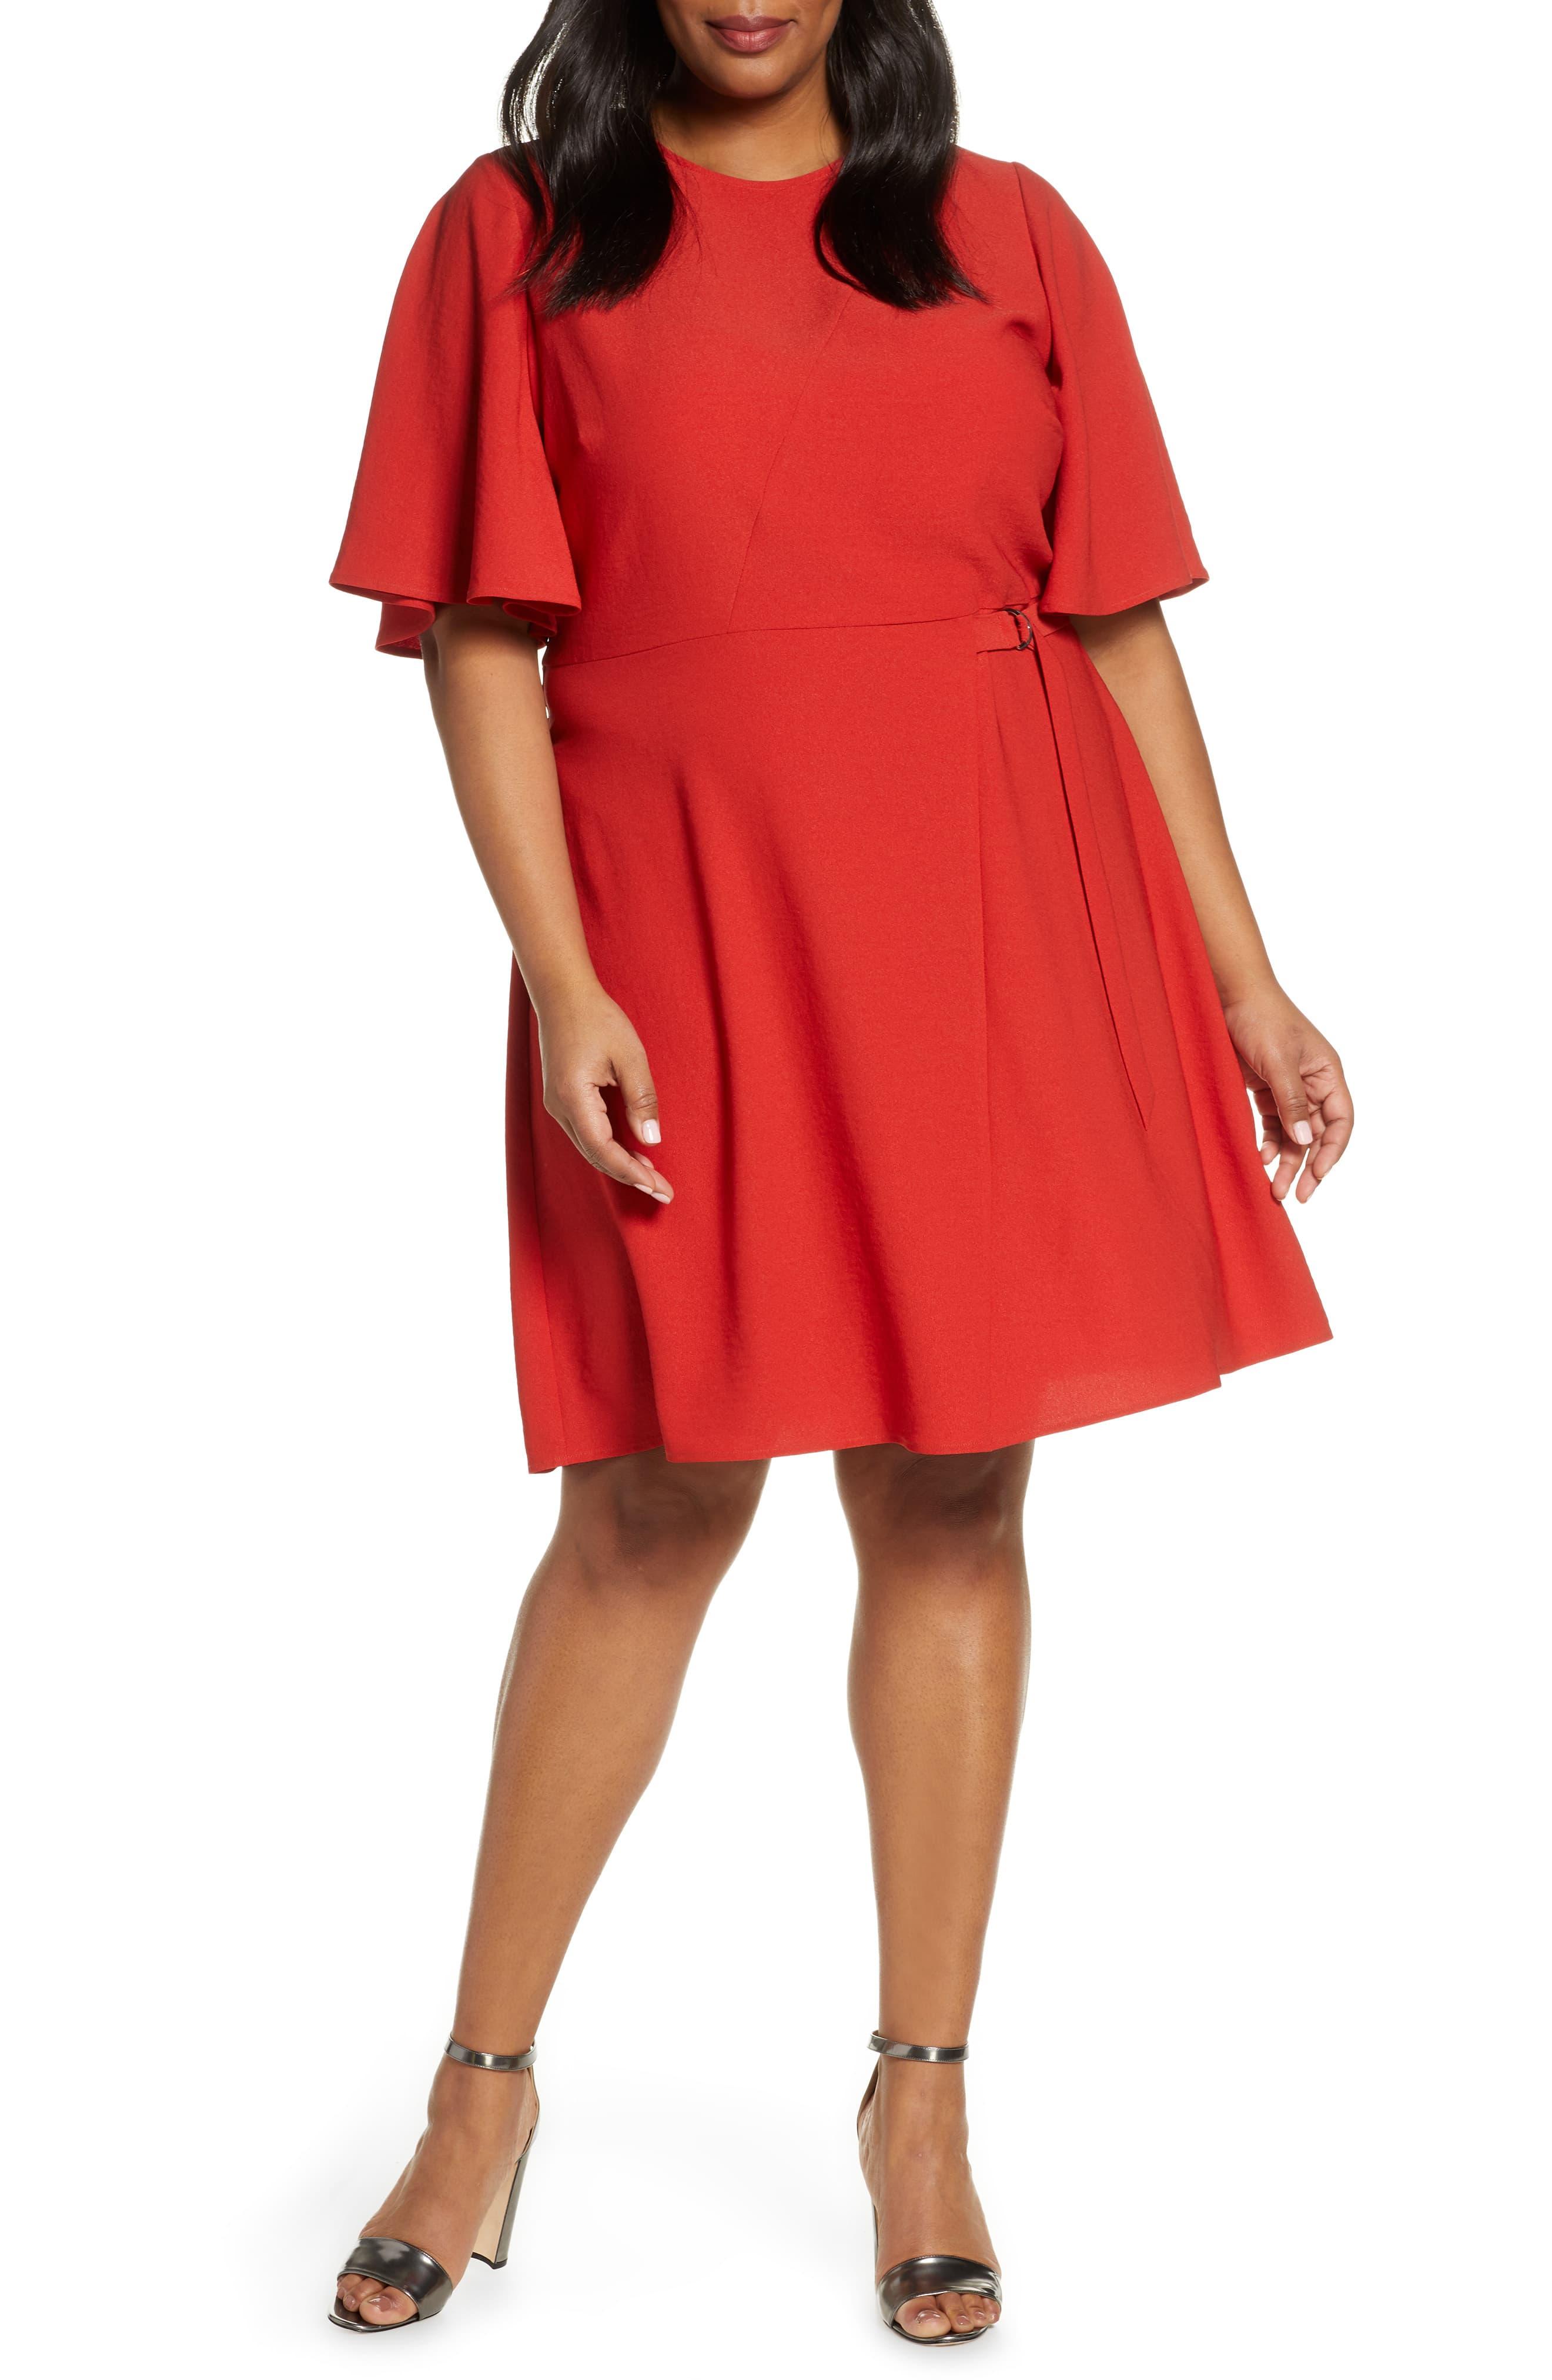 Vince Camuto Flutter Sleeve Rumple Satin Dress in Red - Lyst